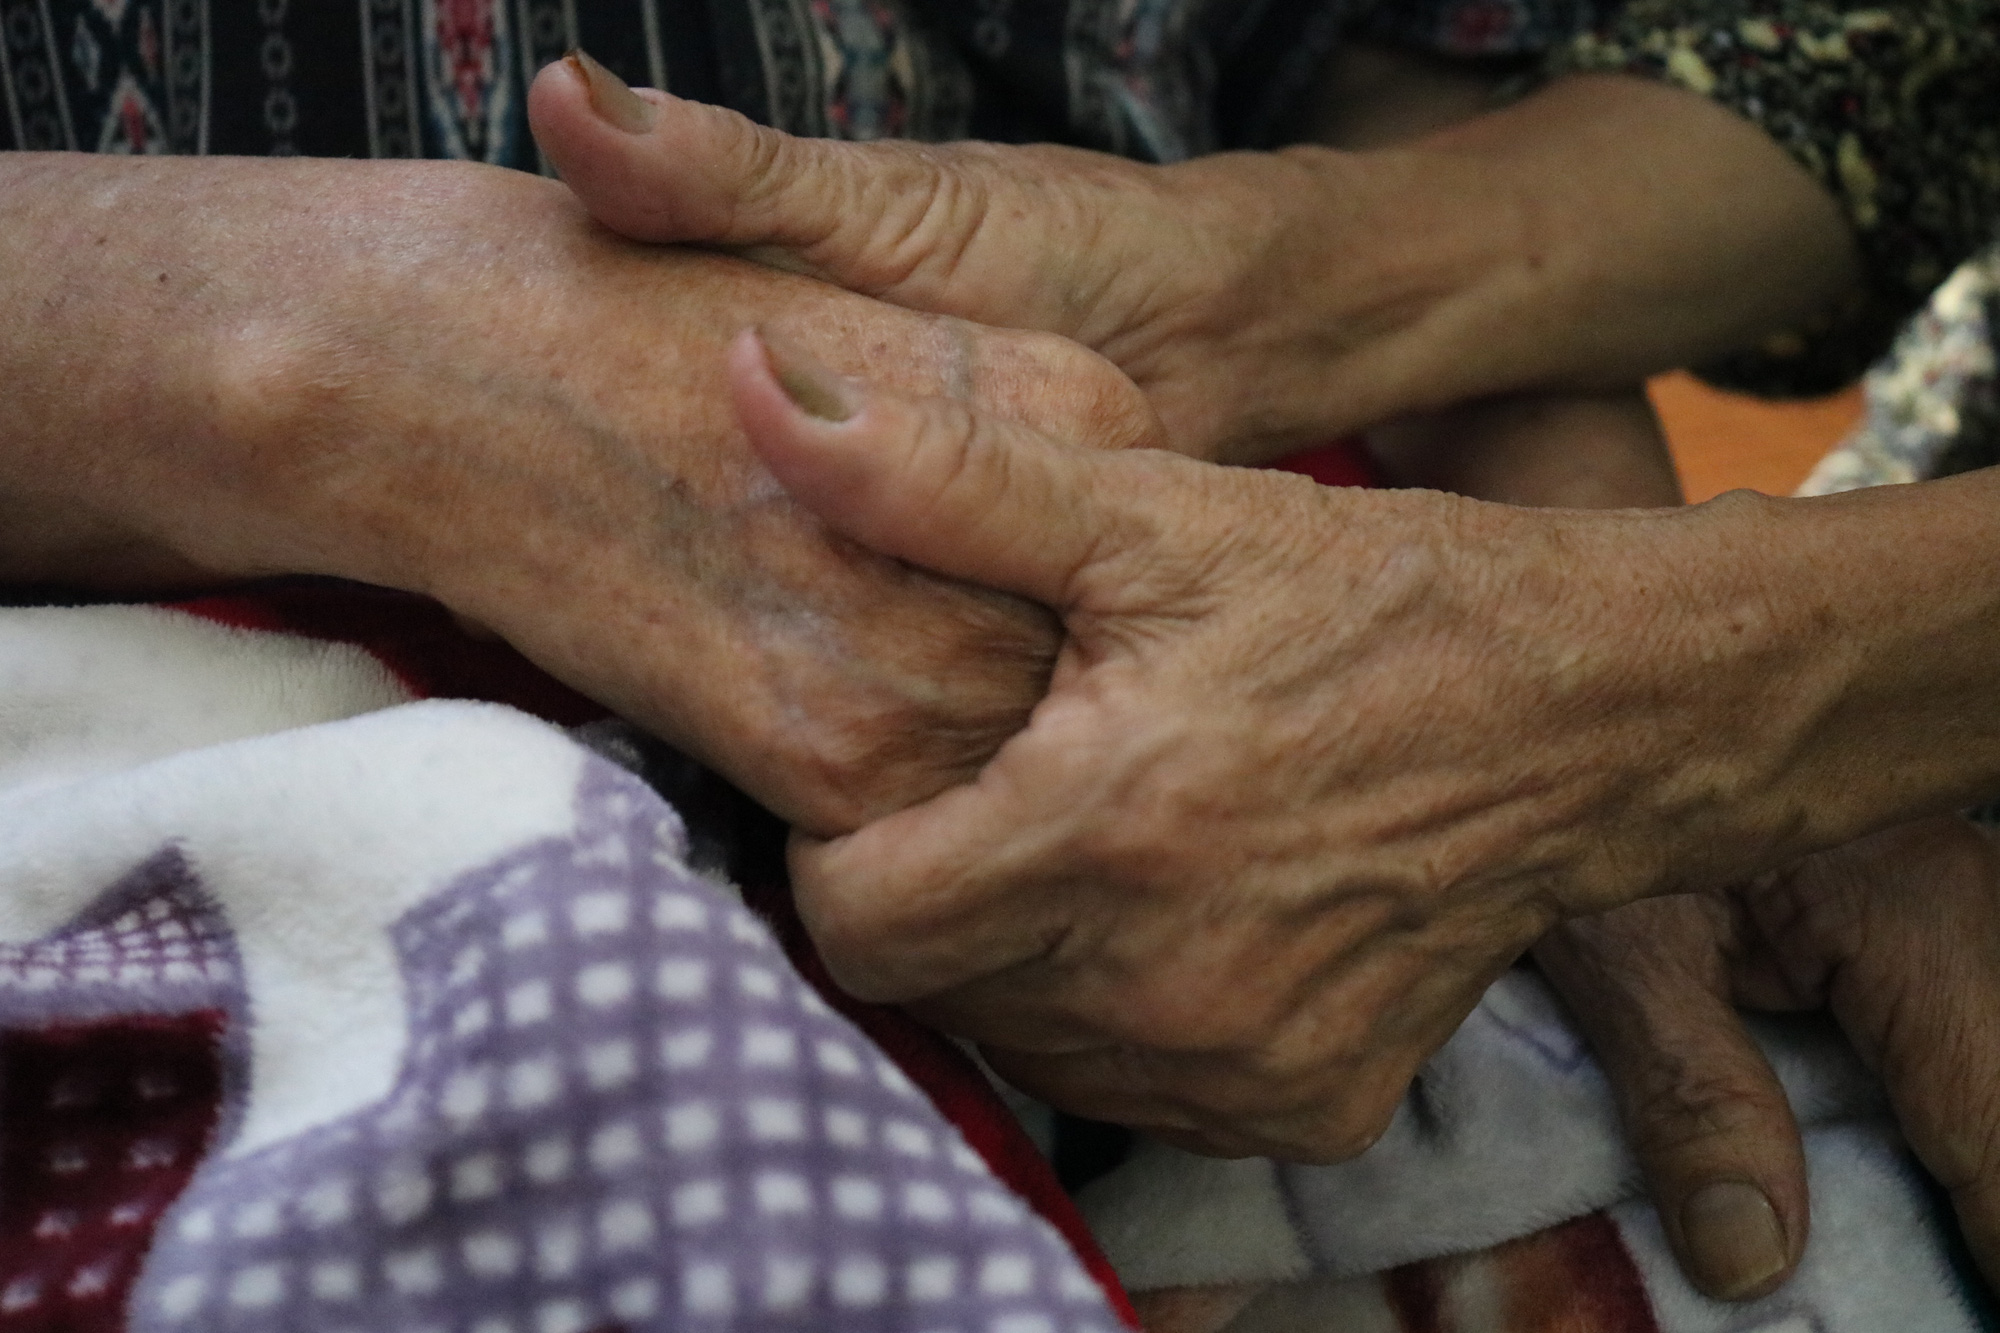 As the wrinkled hands hold each other, she hopes her husband will be in good health so they can enjoy another Tet holiday together. Photo: Ngoc Phuong / Tuoi Tre